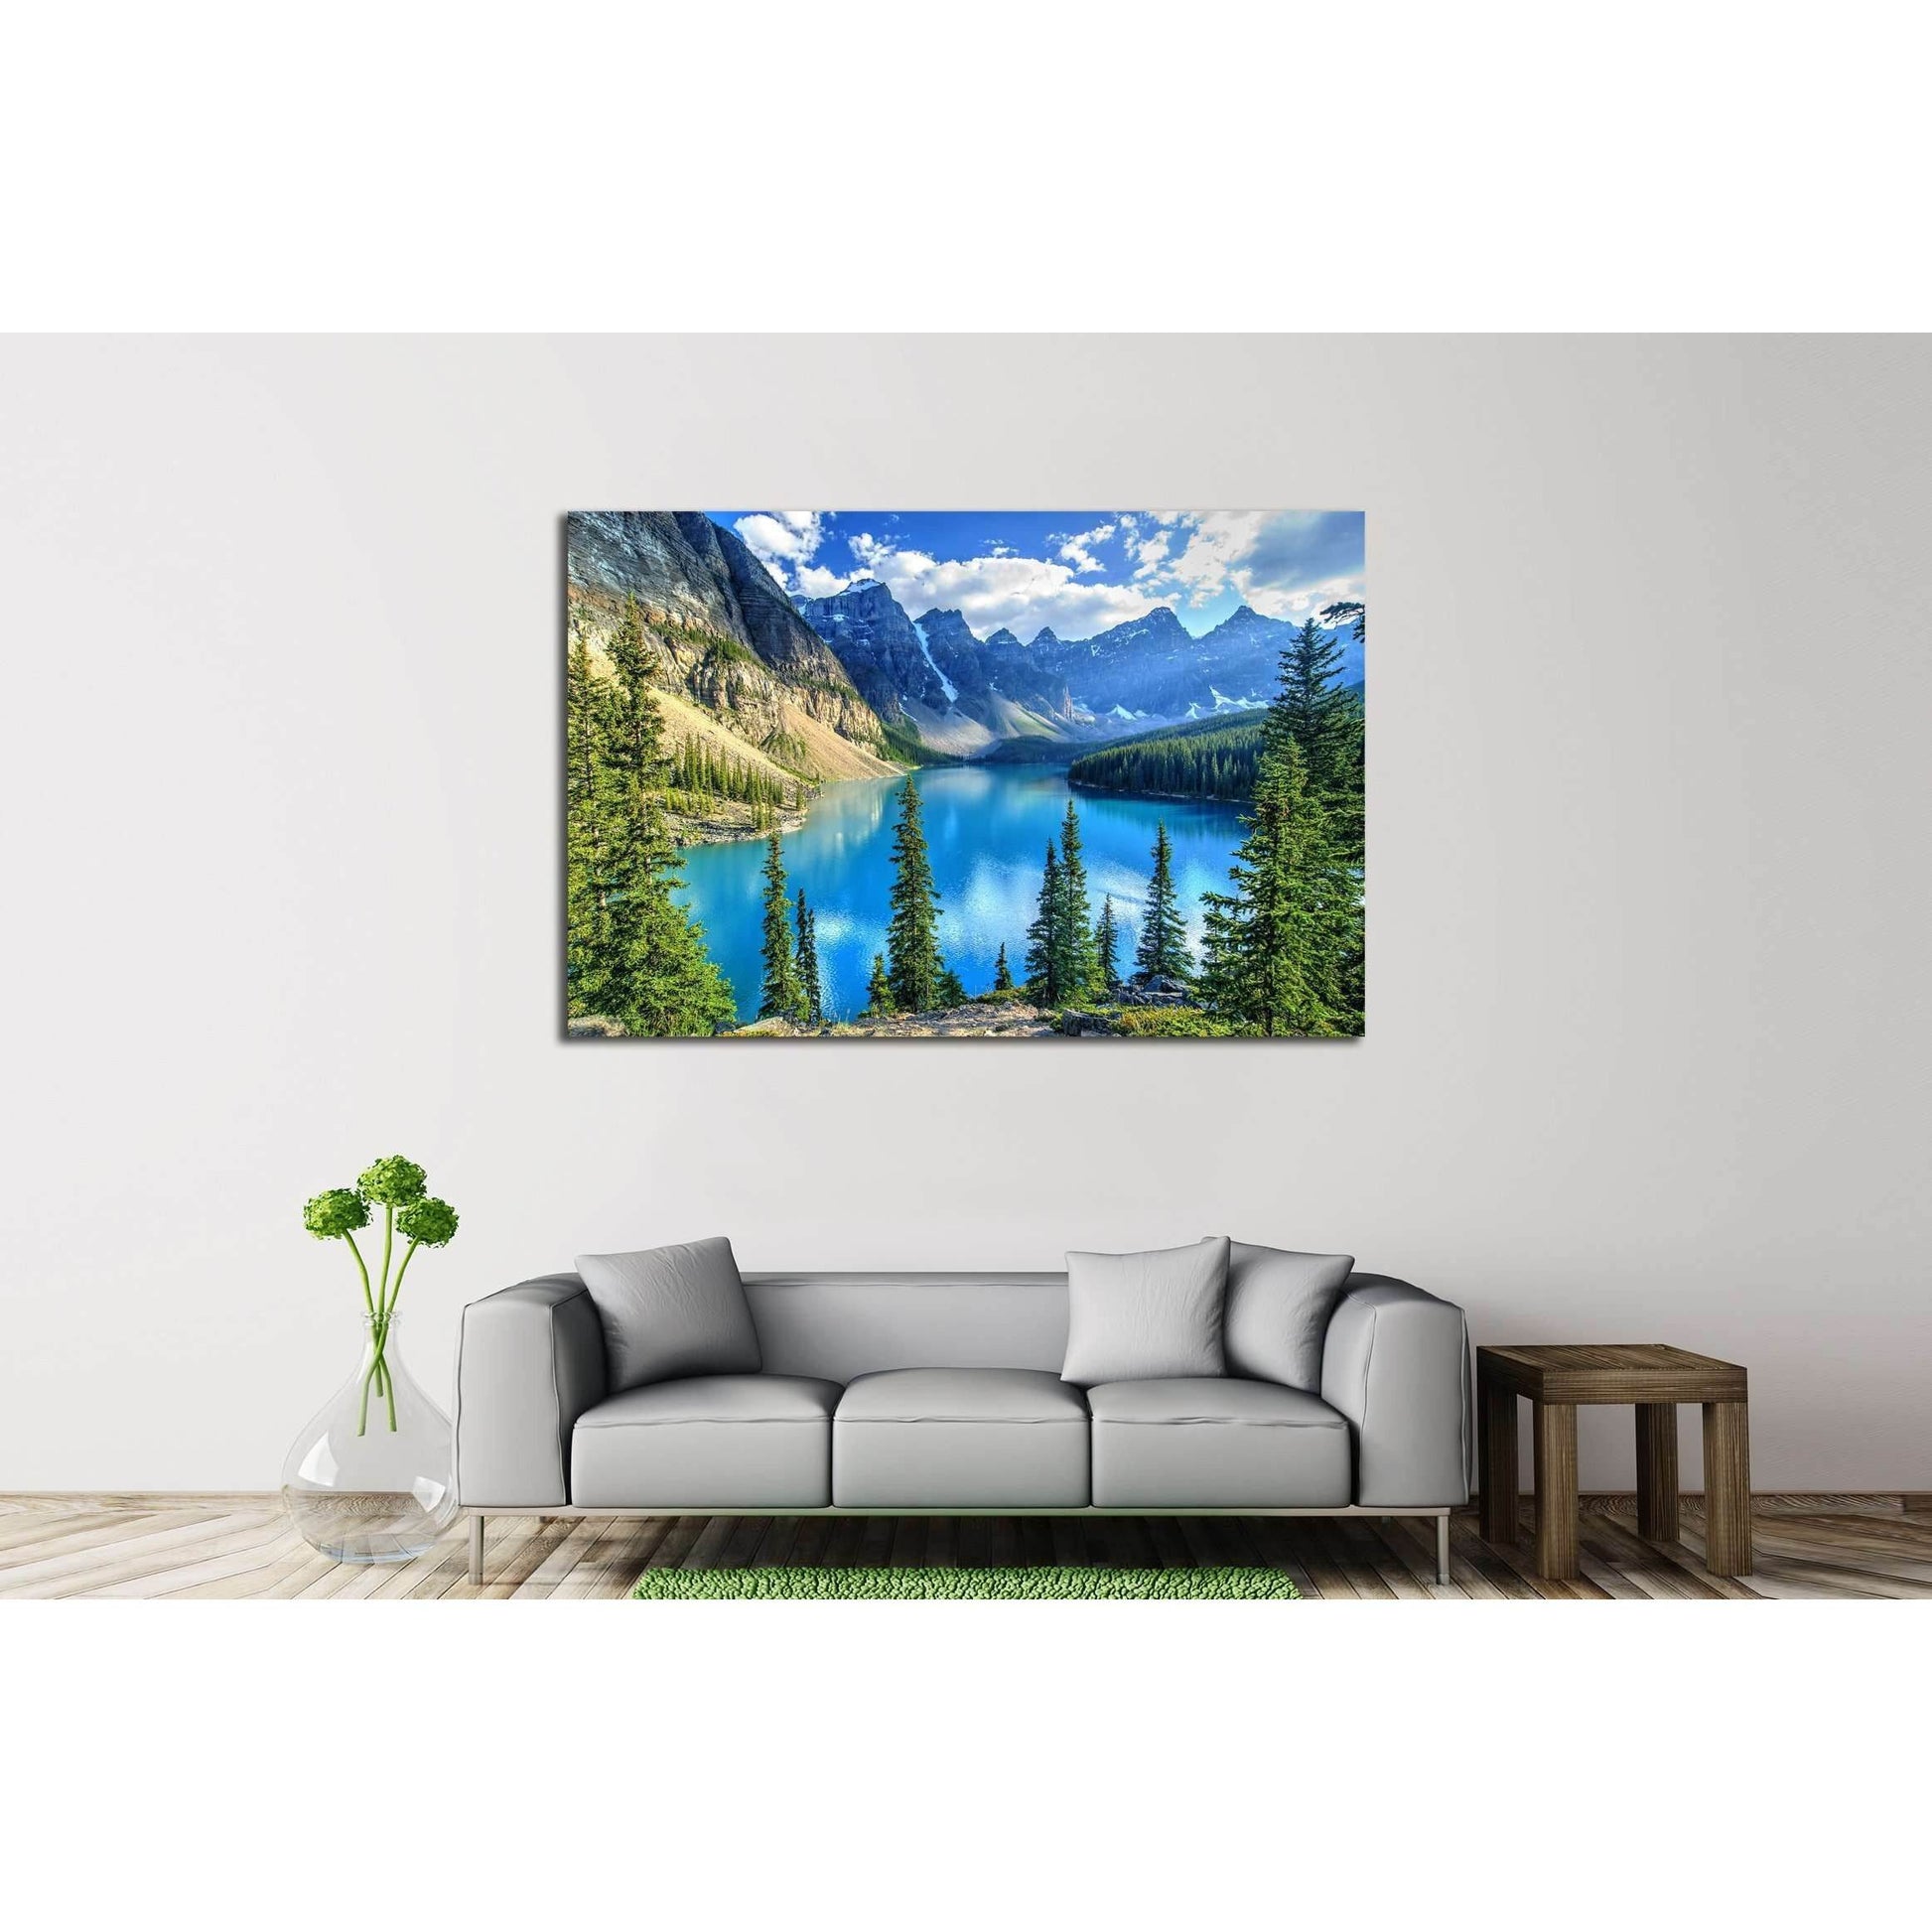 Moraine Lake and Wenkchemna Peaks Canvas Print - Majestic Landscape Wall ArtThis canvas print captures the stunning Wenkchemna Peaks reflected on the serene Moraine Lake, with its vibrant turquoise waters surrounded by verdant evergreens. The majestic mou